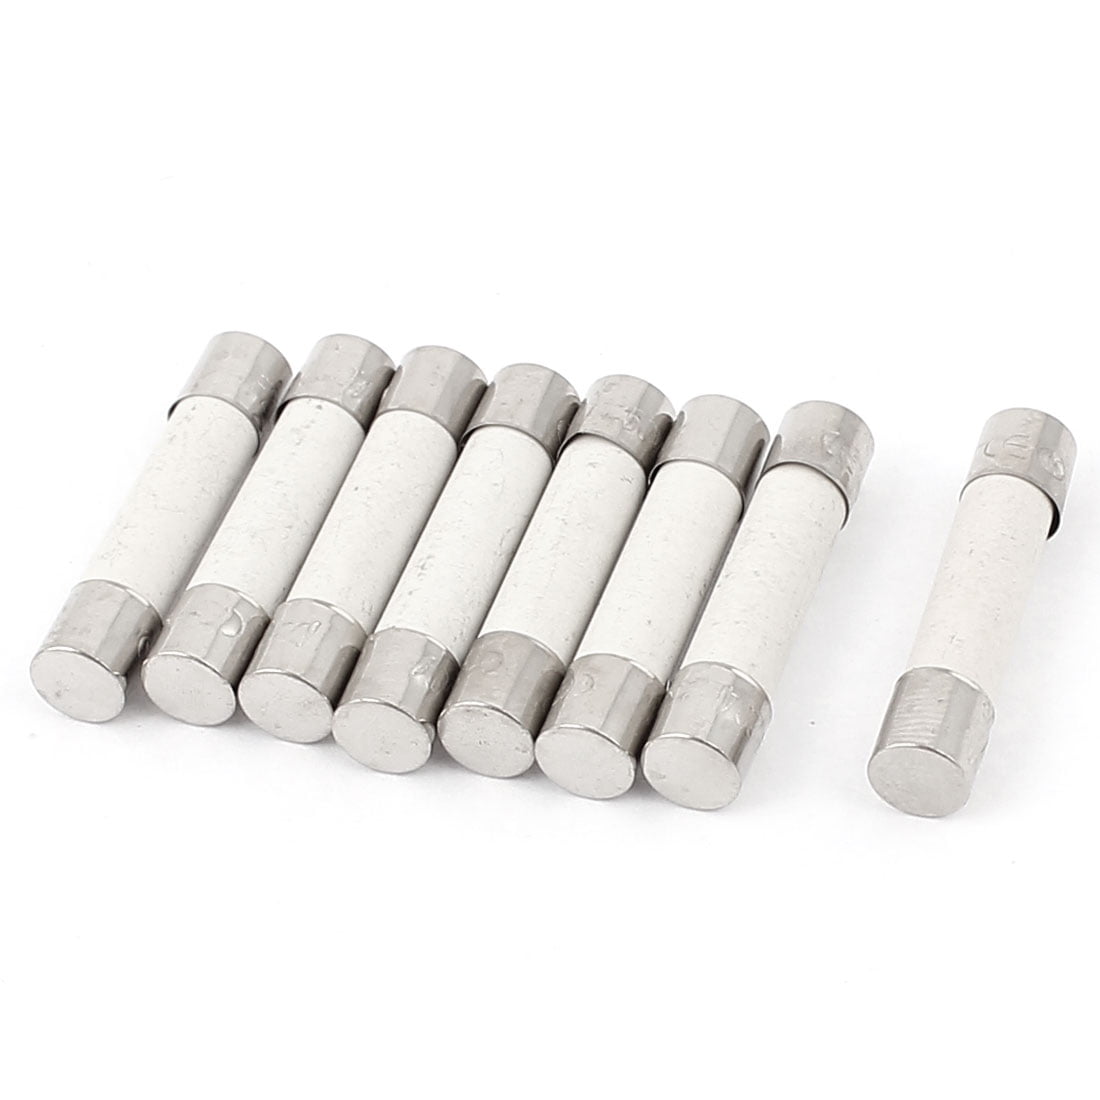 20 Pcs Ceramic Fuse 8 A 250 V 6 mm x 30 mm Rapide Coup 6x30mm NEUF